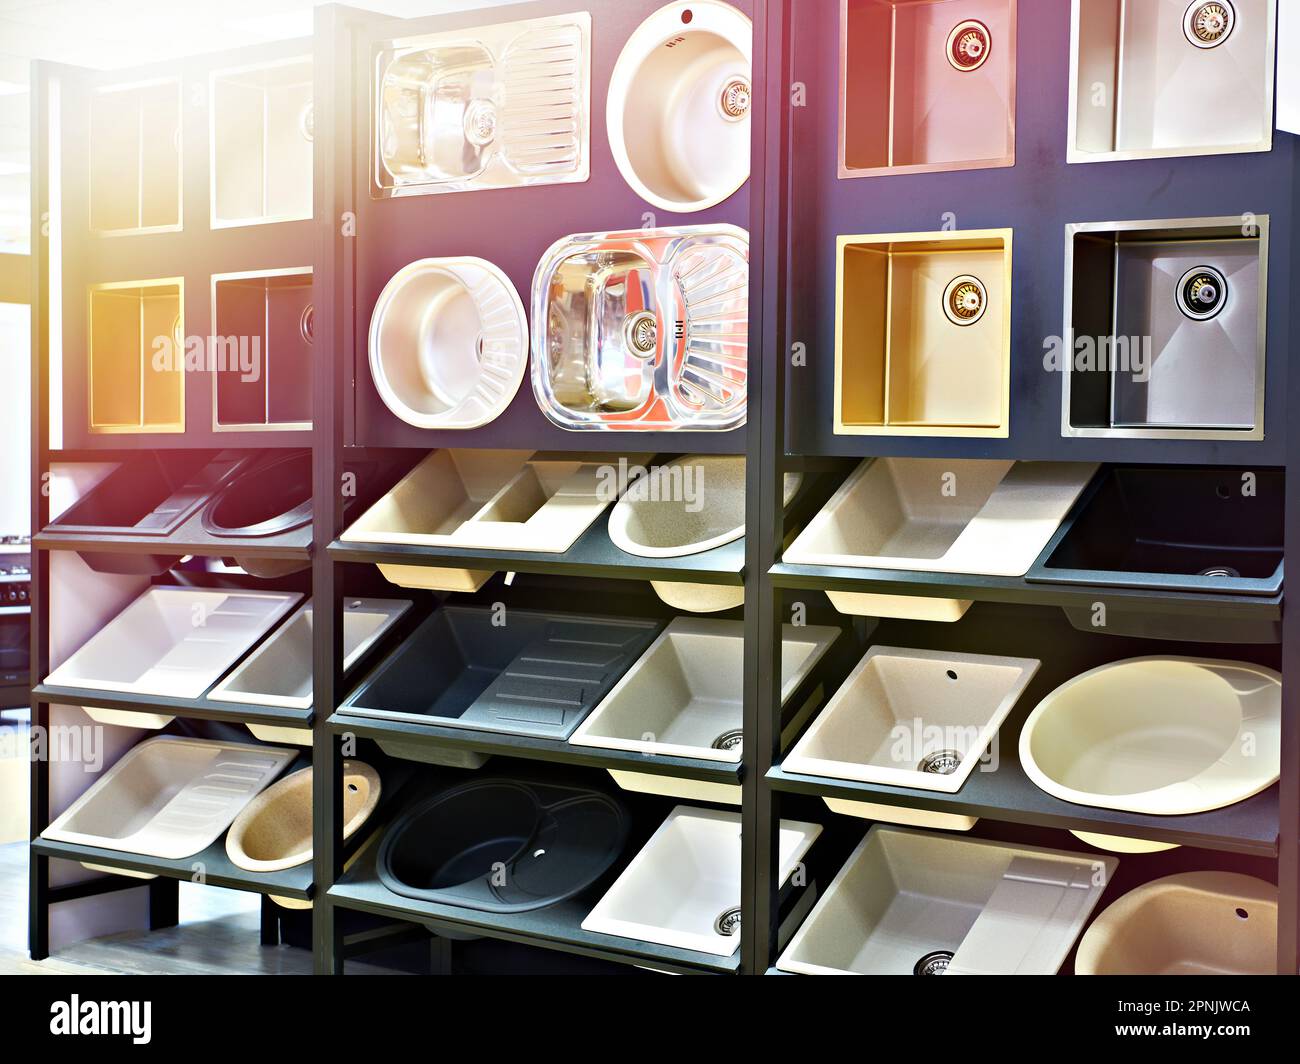 Exhibition of kitchen sinks in the store Stock Photo - Alamy